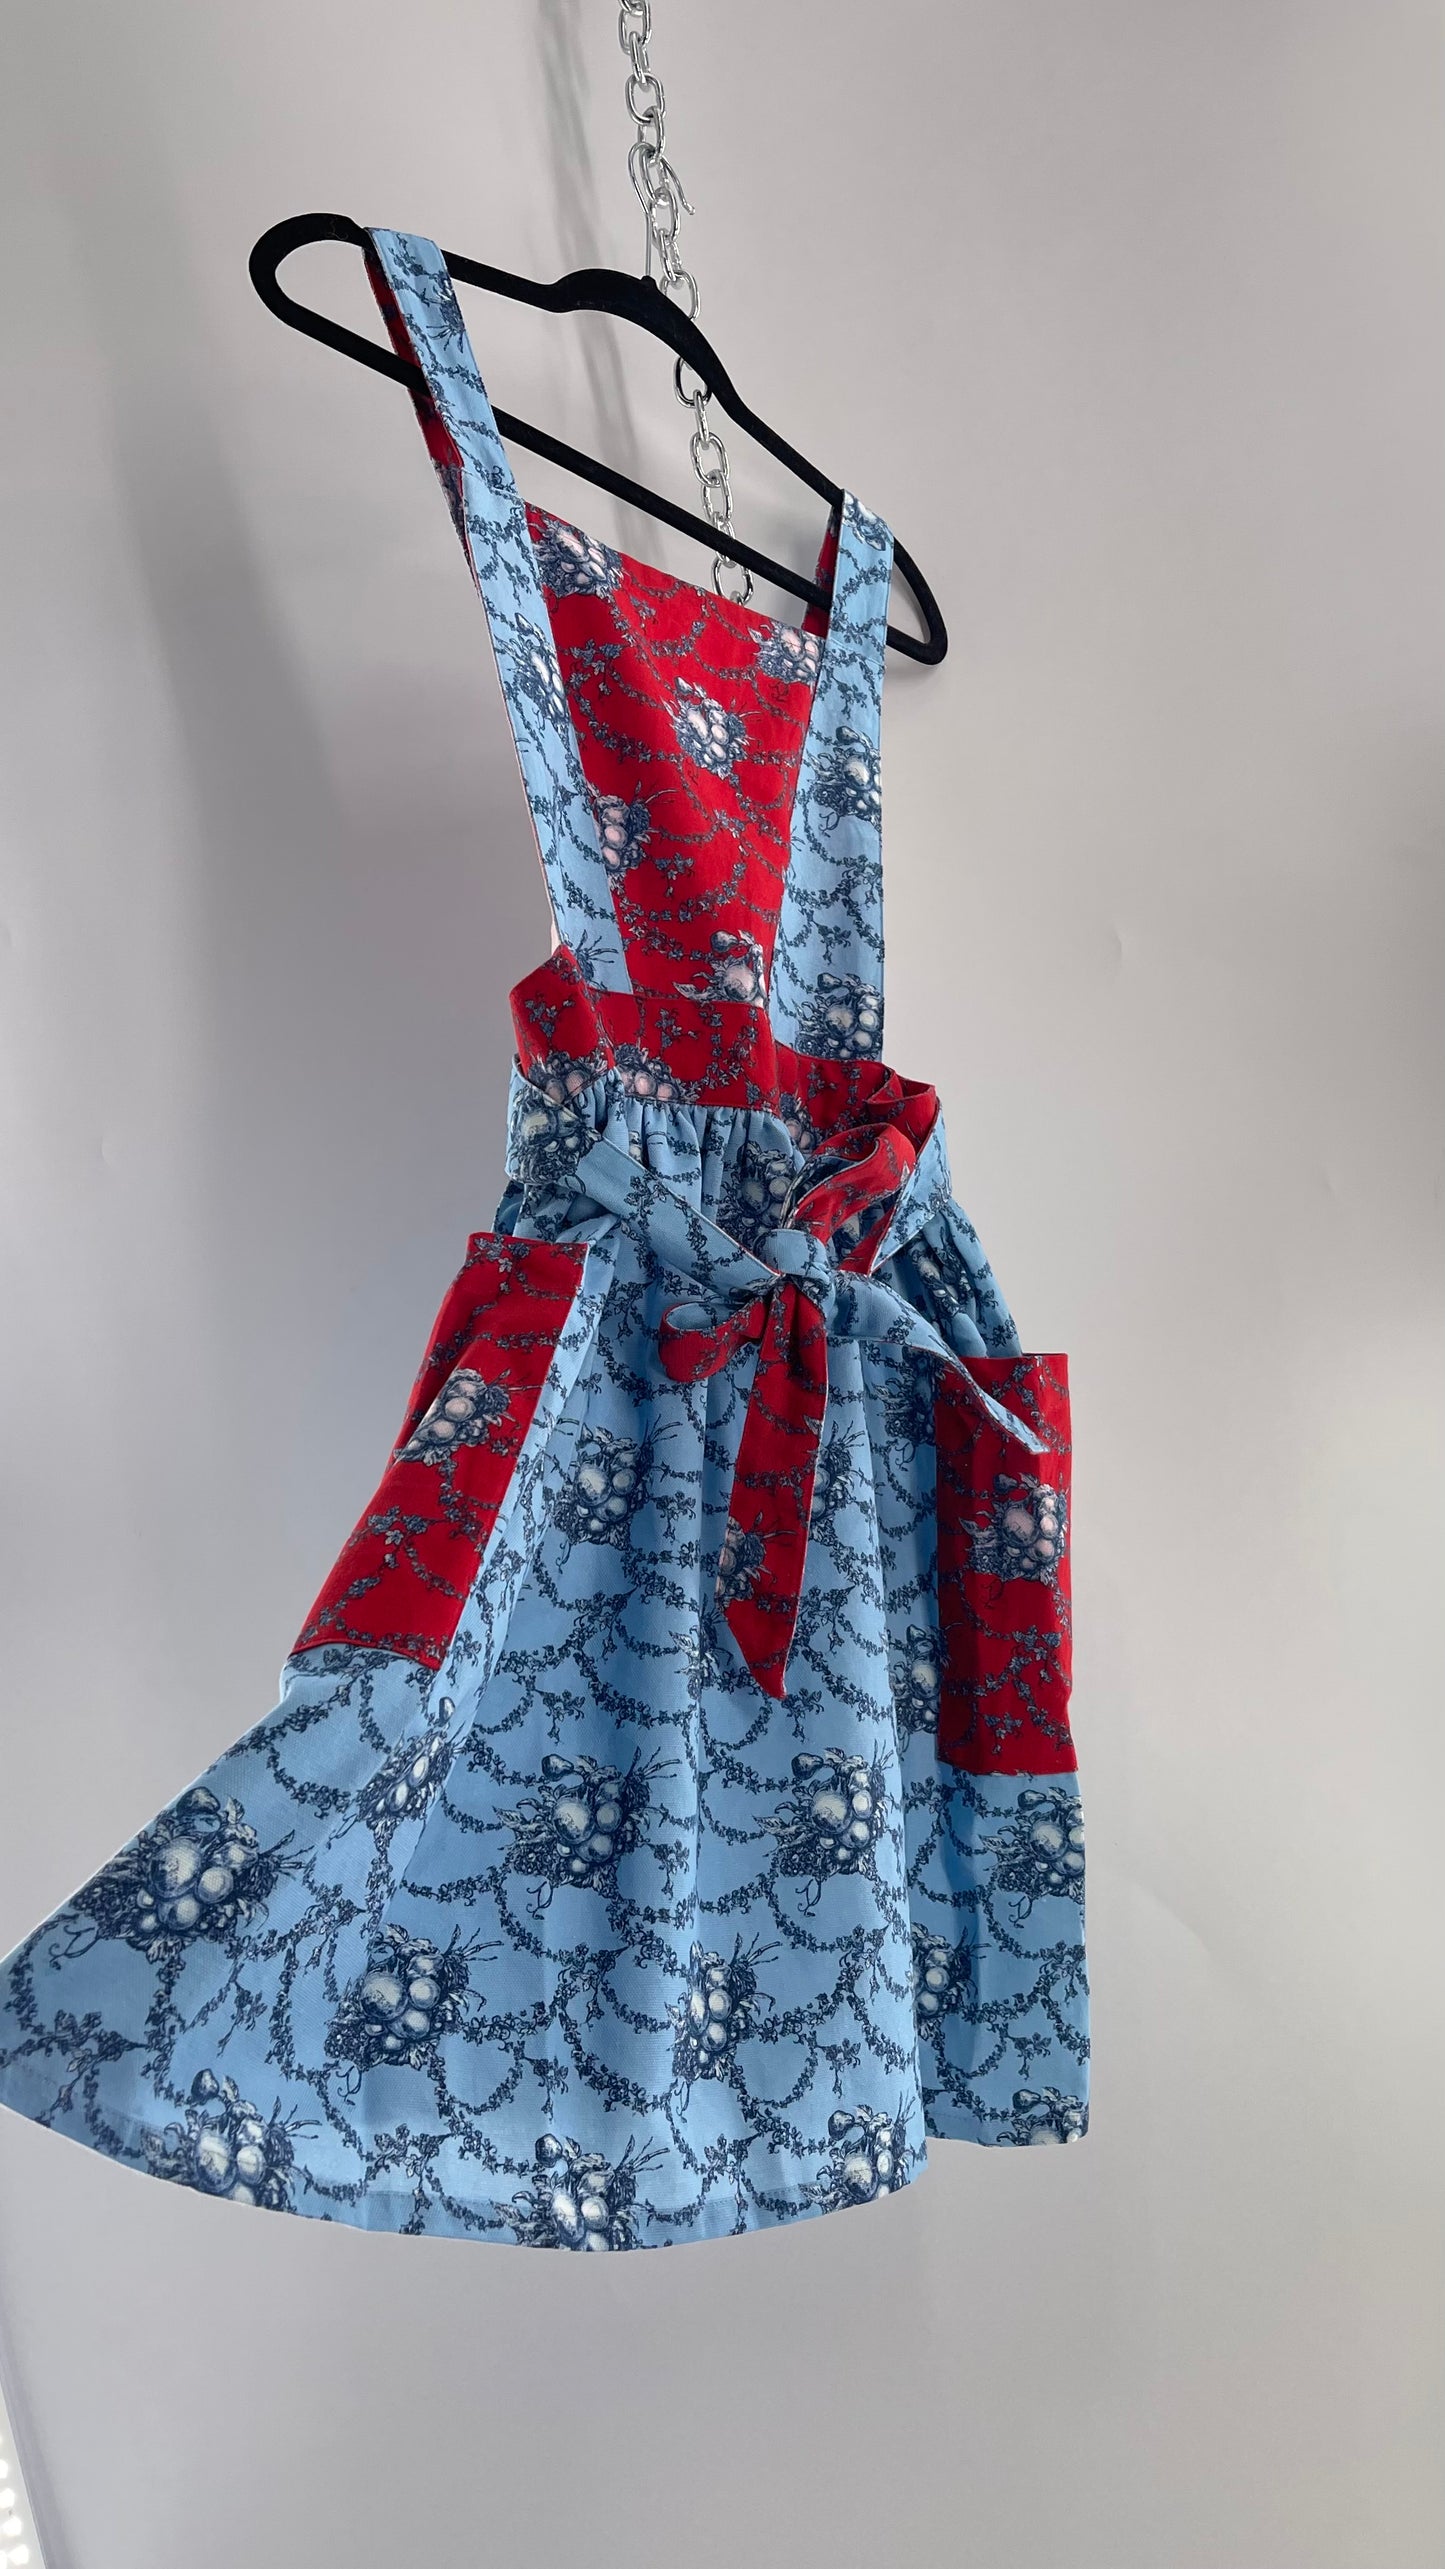 Vintage Apron Red and Baby Blue Floral/Citrus Patterned Mini Dress with Tie Around Bow (S\M)